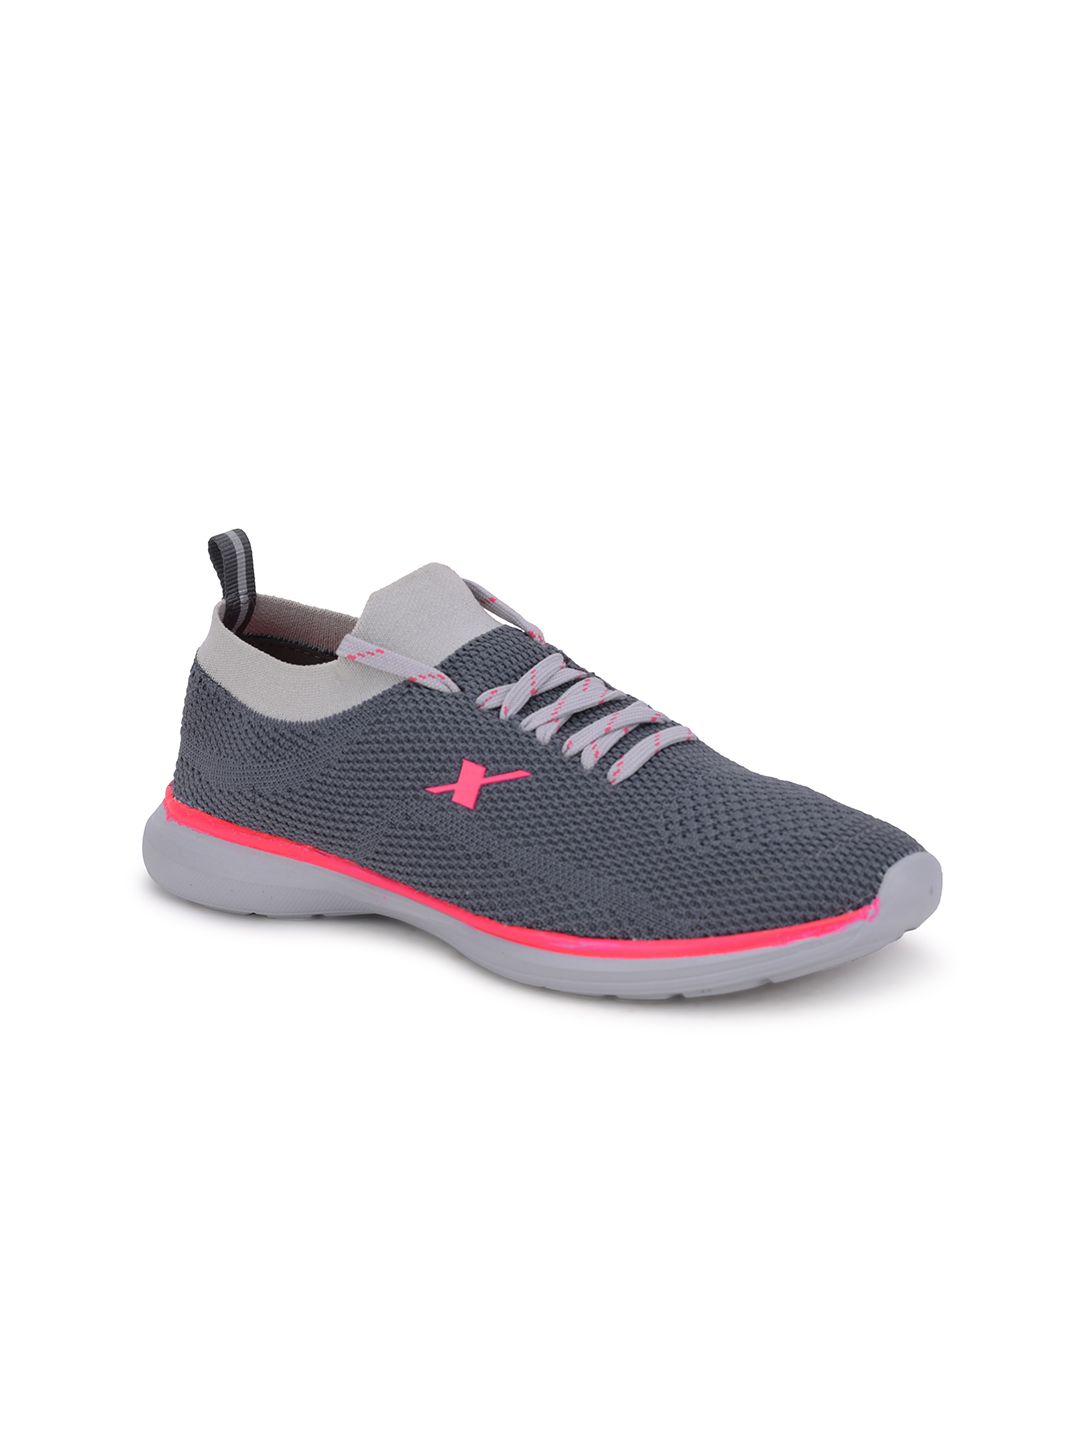 Sparx Women Grey & Pink Textile Running Shoes Price in India